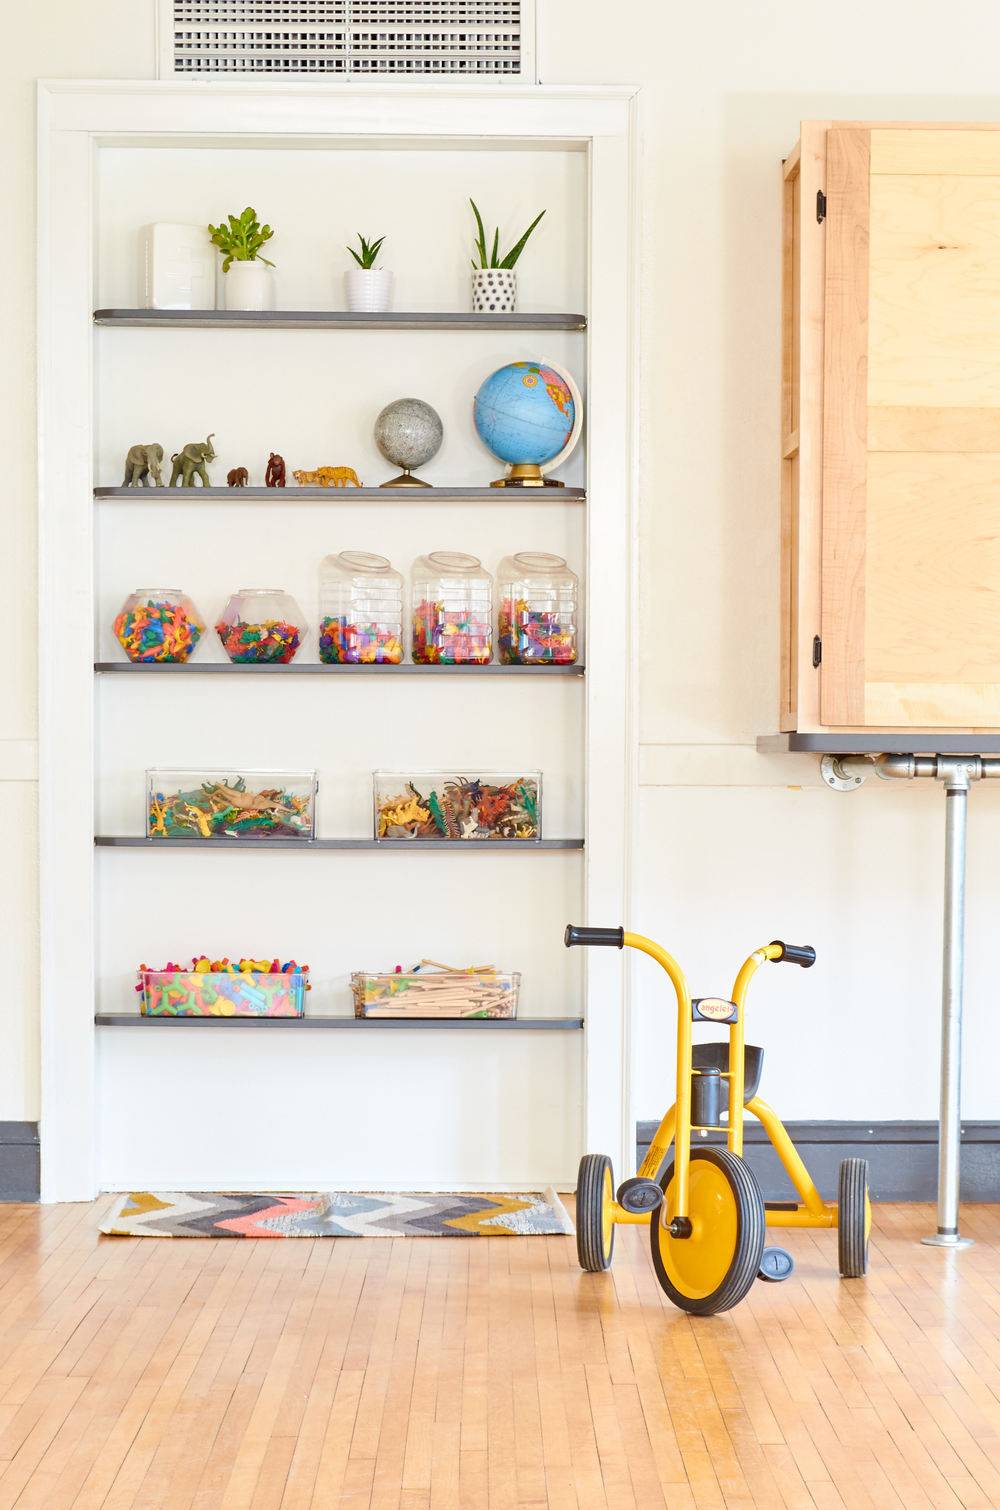 A yellow and grey trike sits on the wooden floor near a bookshelf.